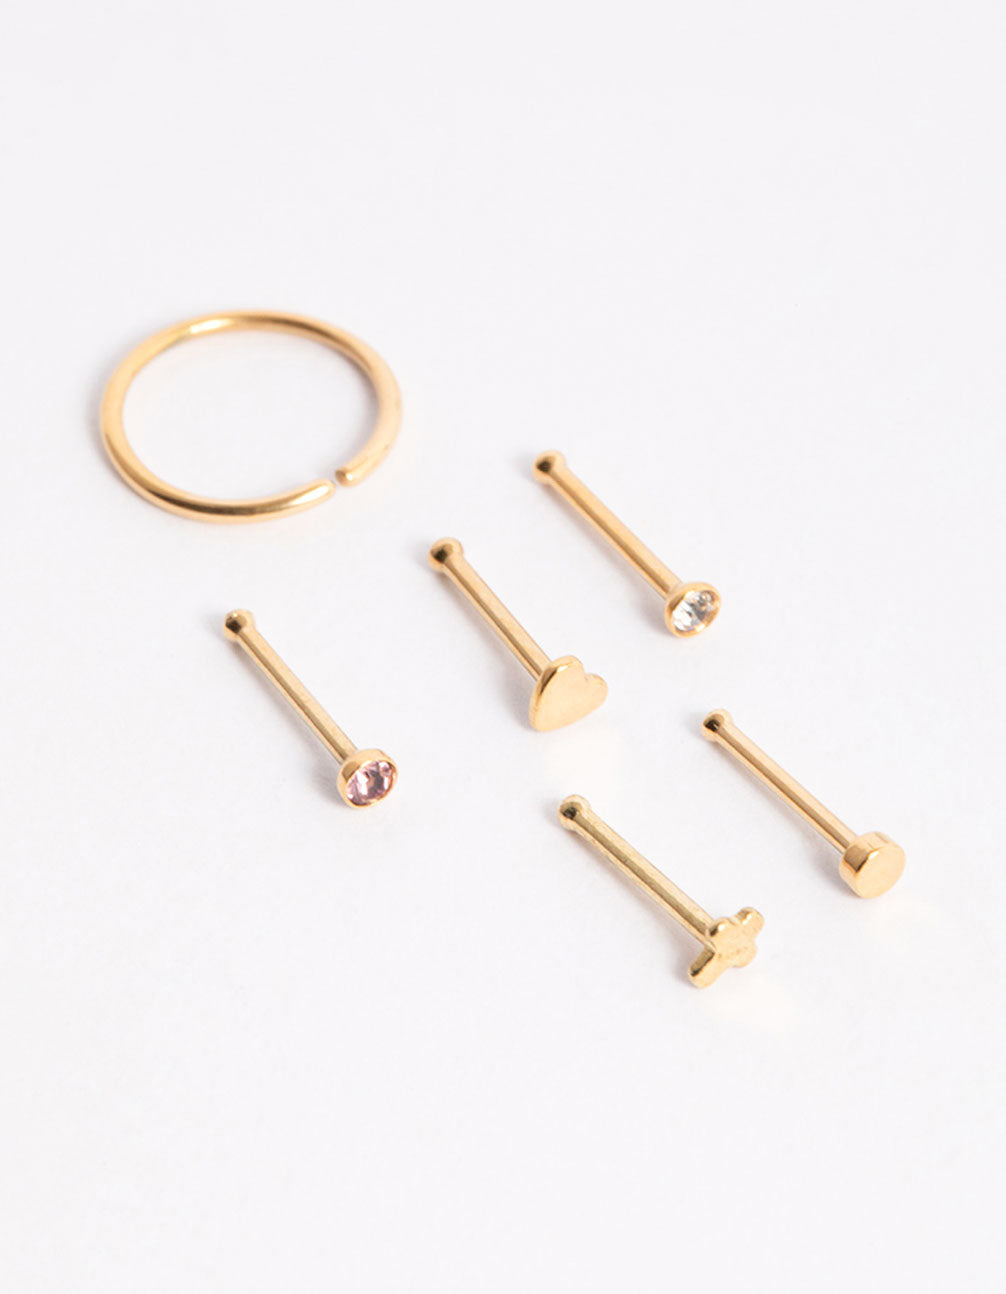 Piercing Tools Archives - Body Jewellery Shop